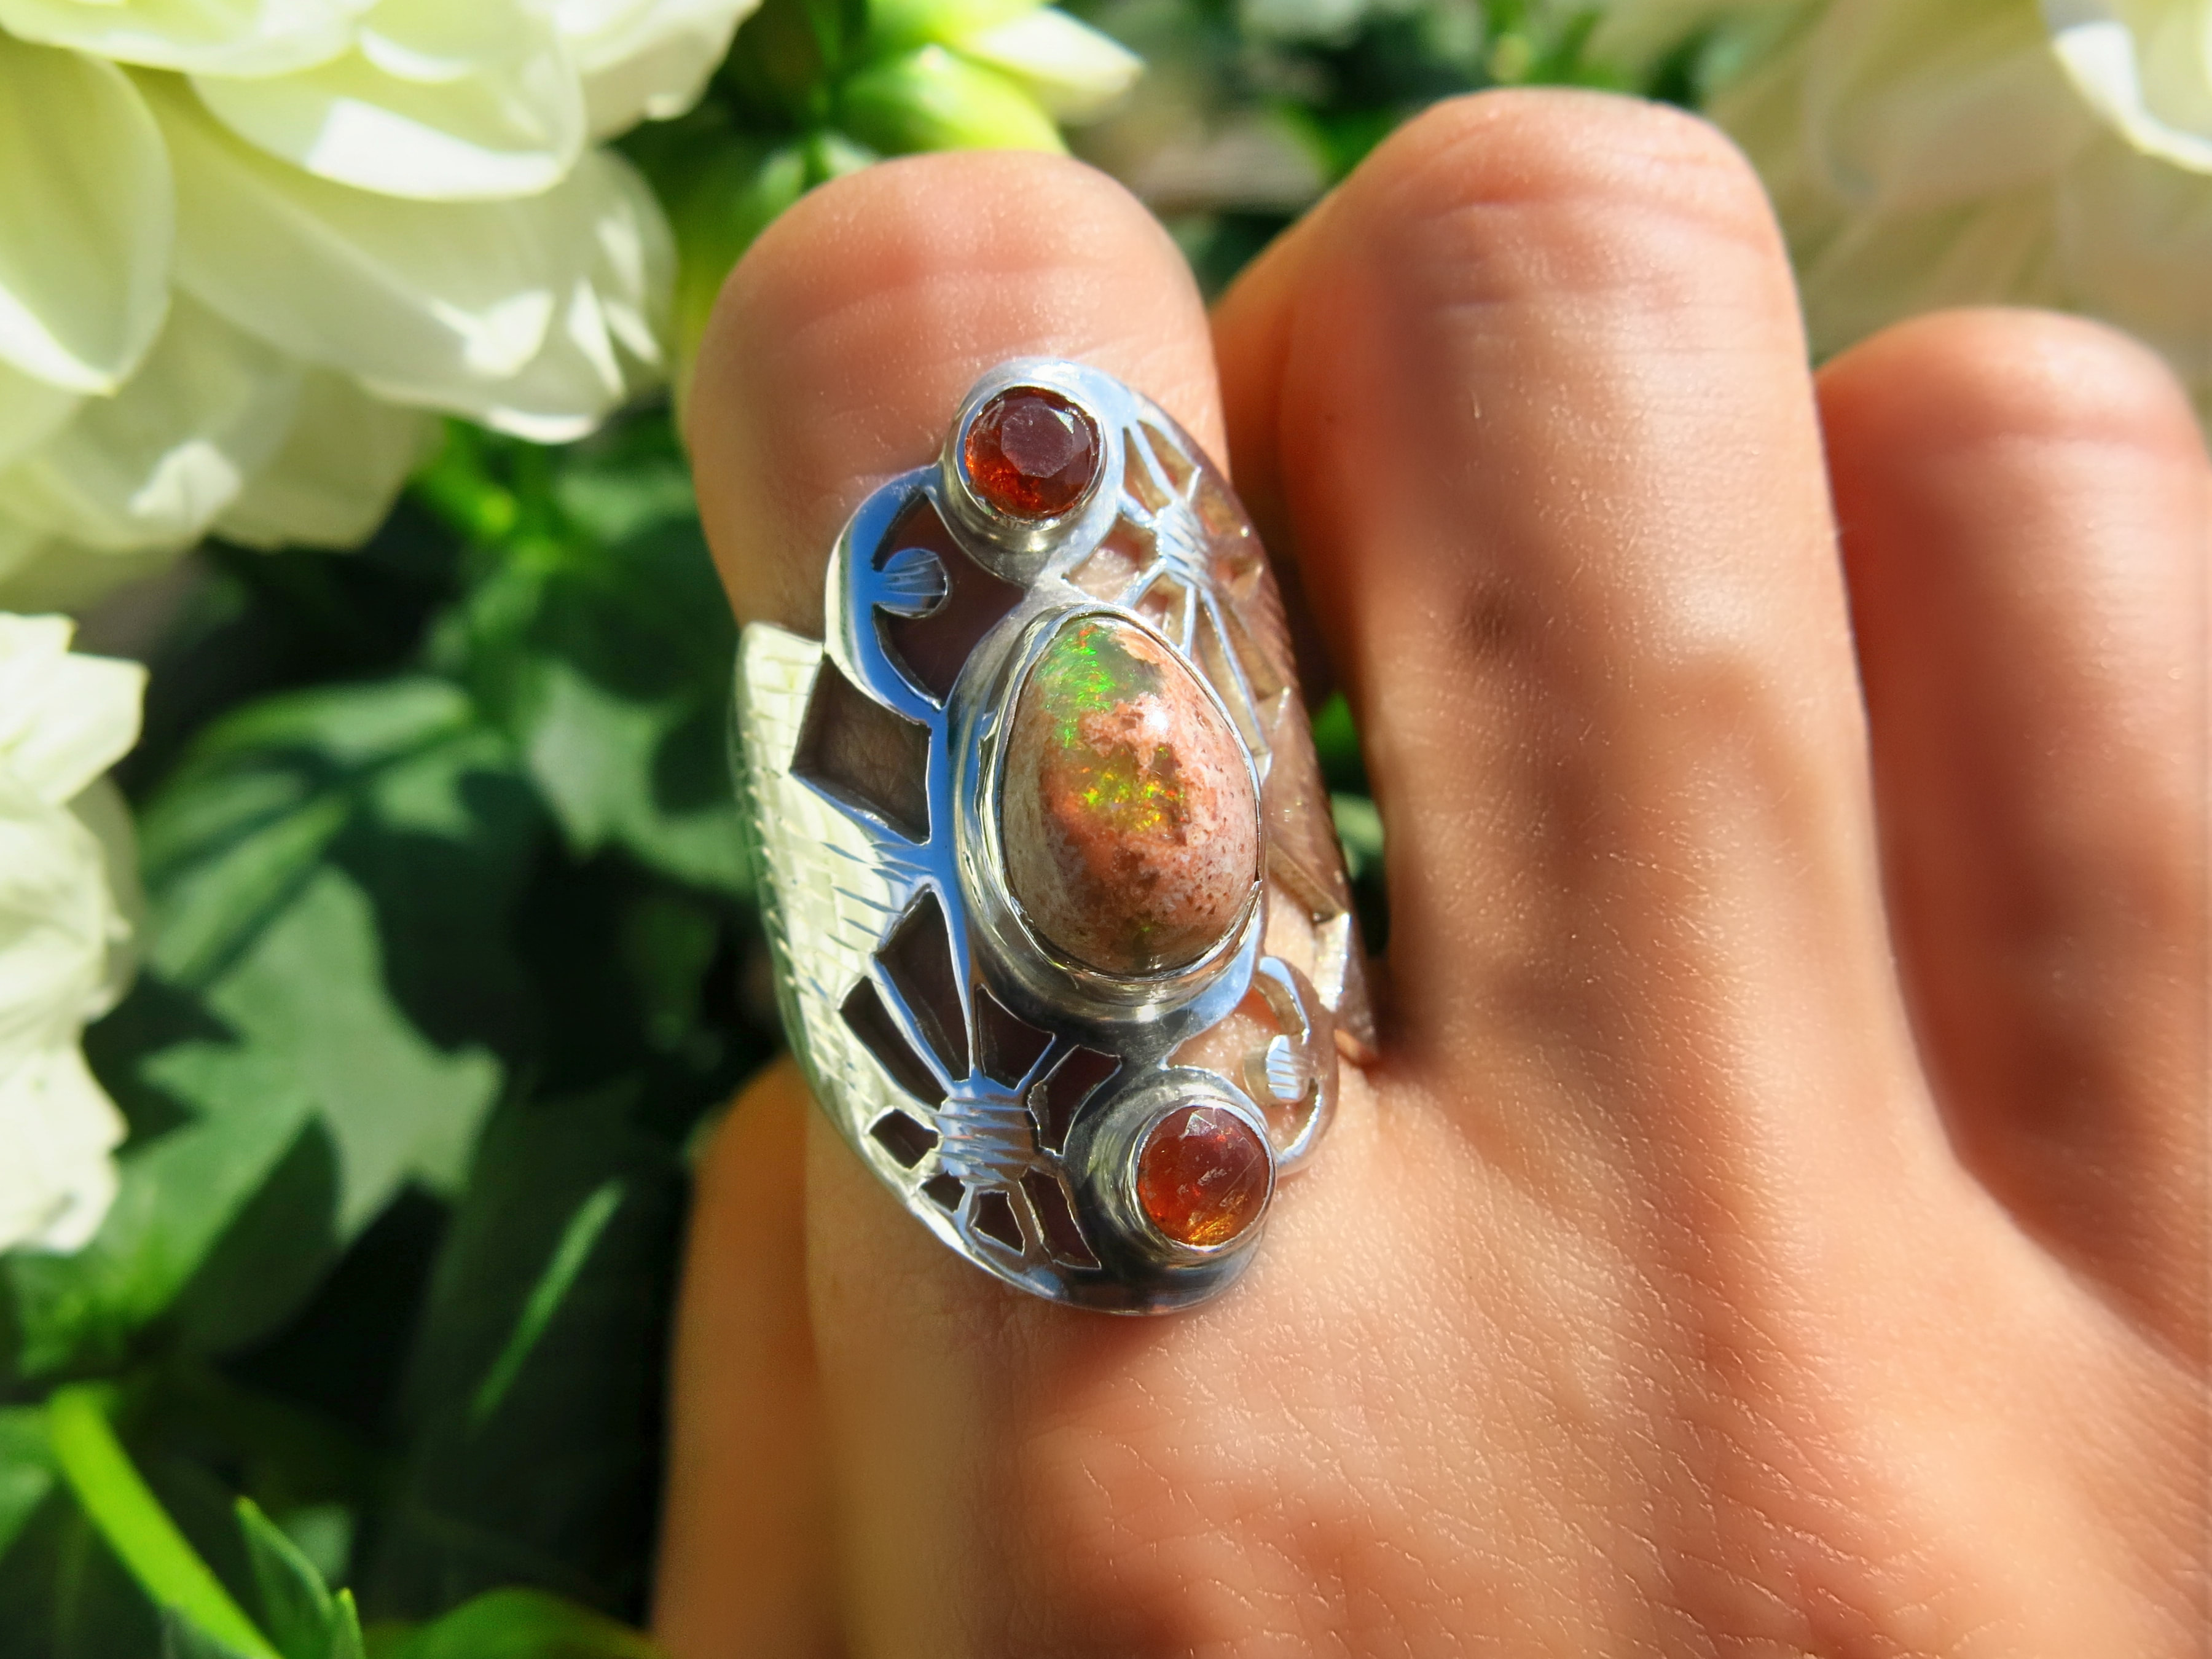 EXTREMELY bright intense red colored fire opal ring, natural opal ring,  silver fire opal ring, genuine black opal, black fire opal ring